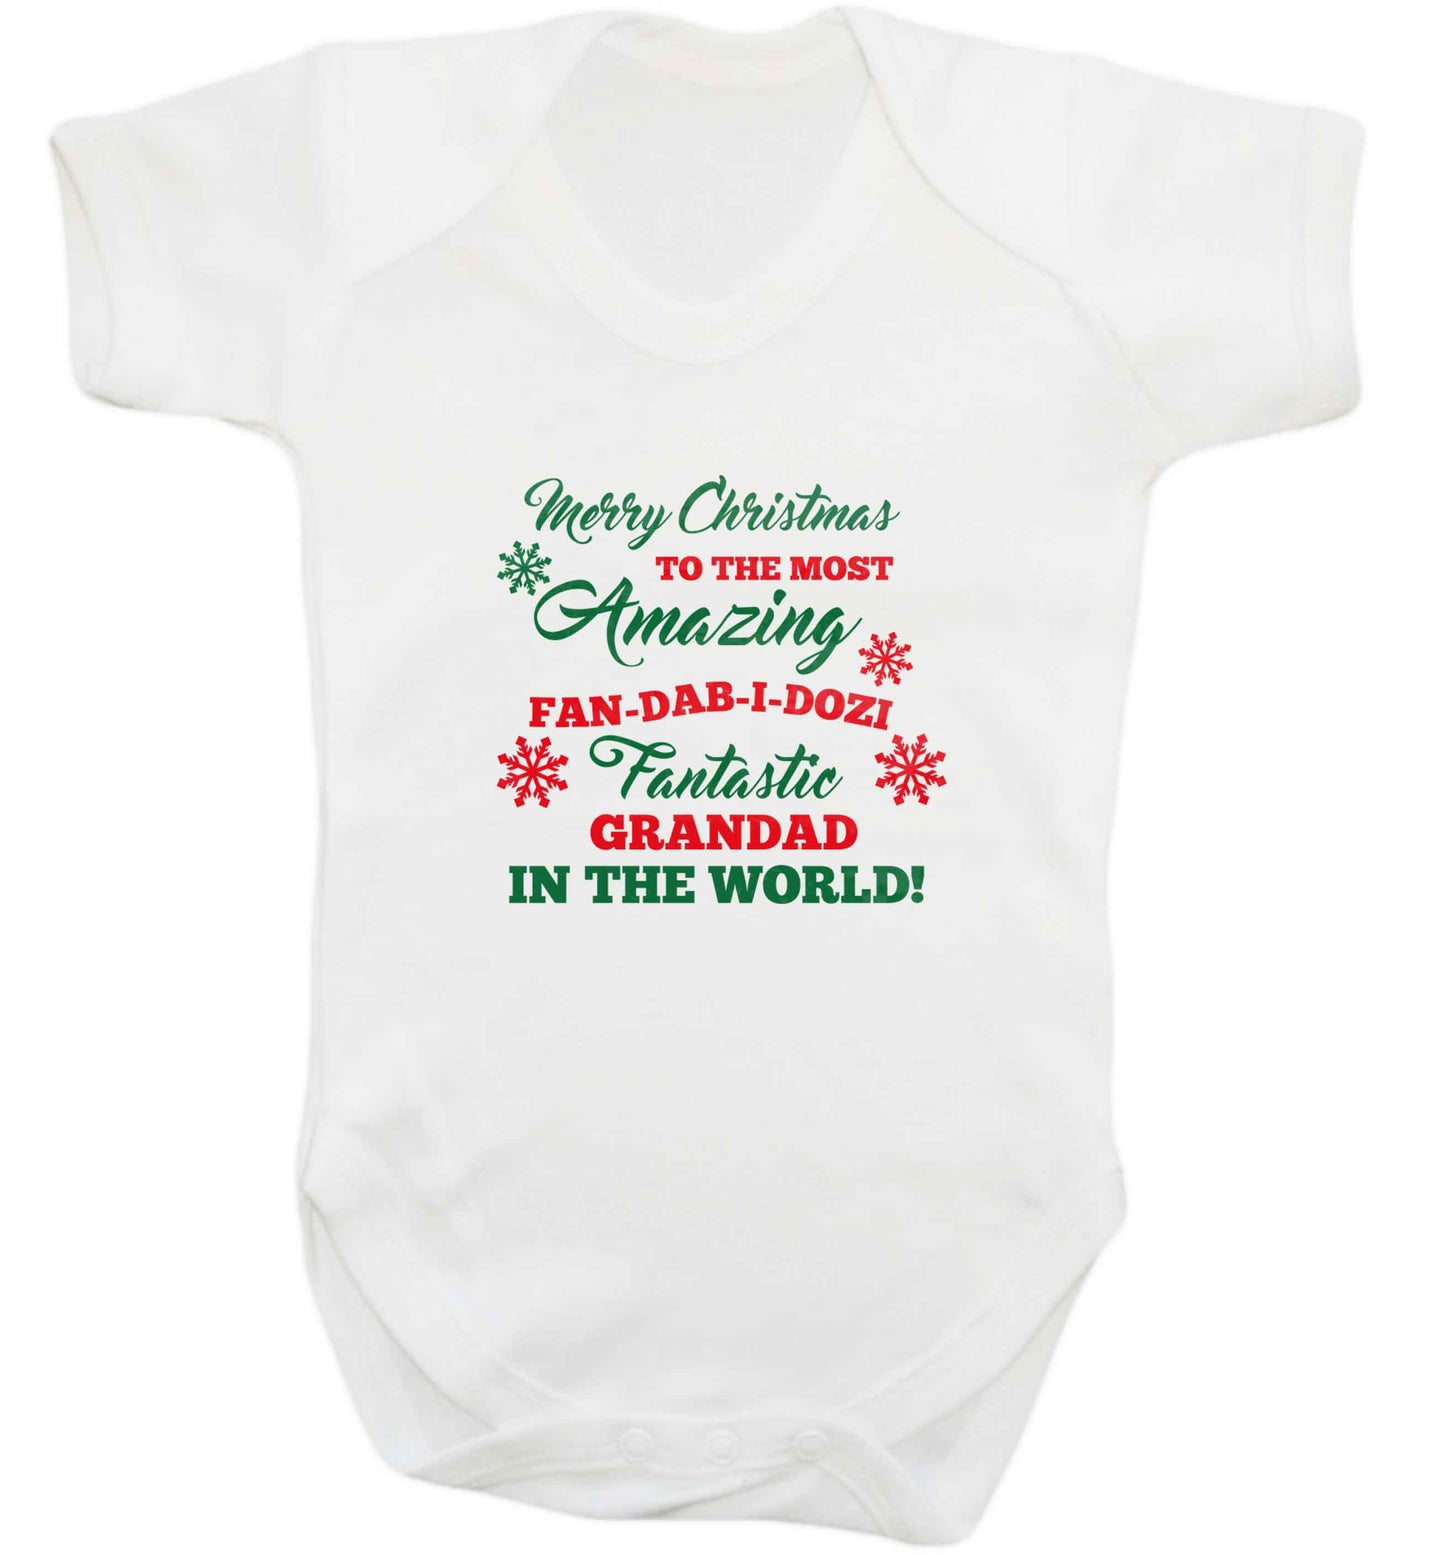 Merry Christmas to the most amazing fan-dab-i-dozi fantasic Grandad in the world baby vest white 18-24 months